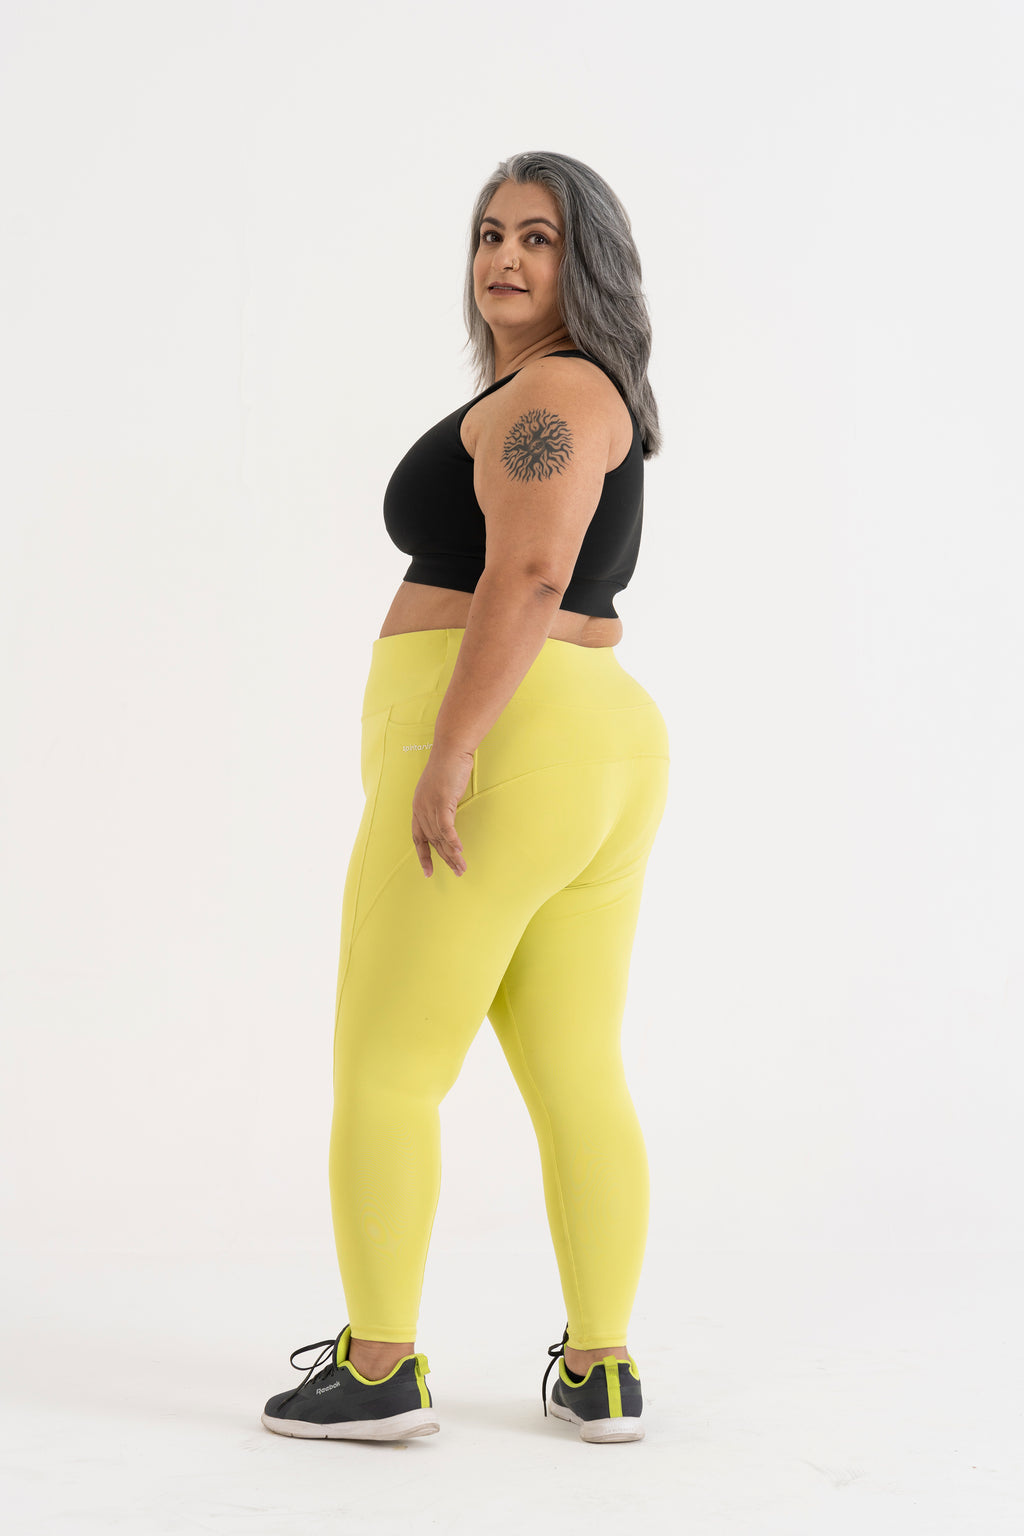 Plus Size Leggings and Tights